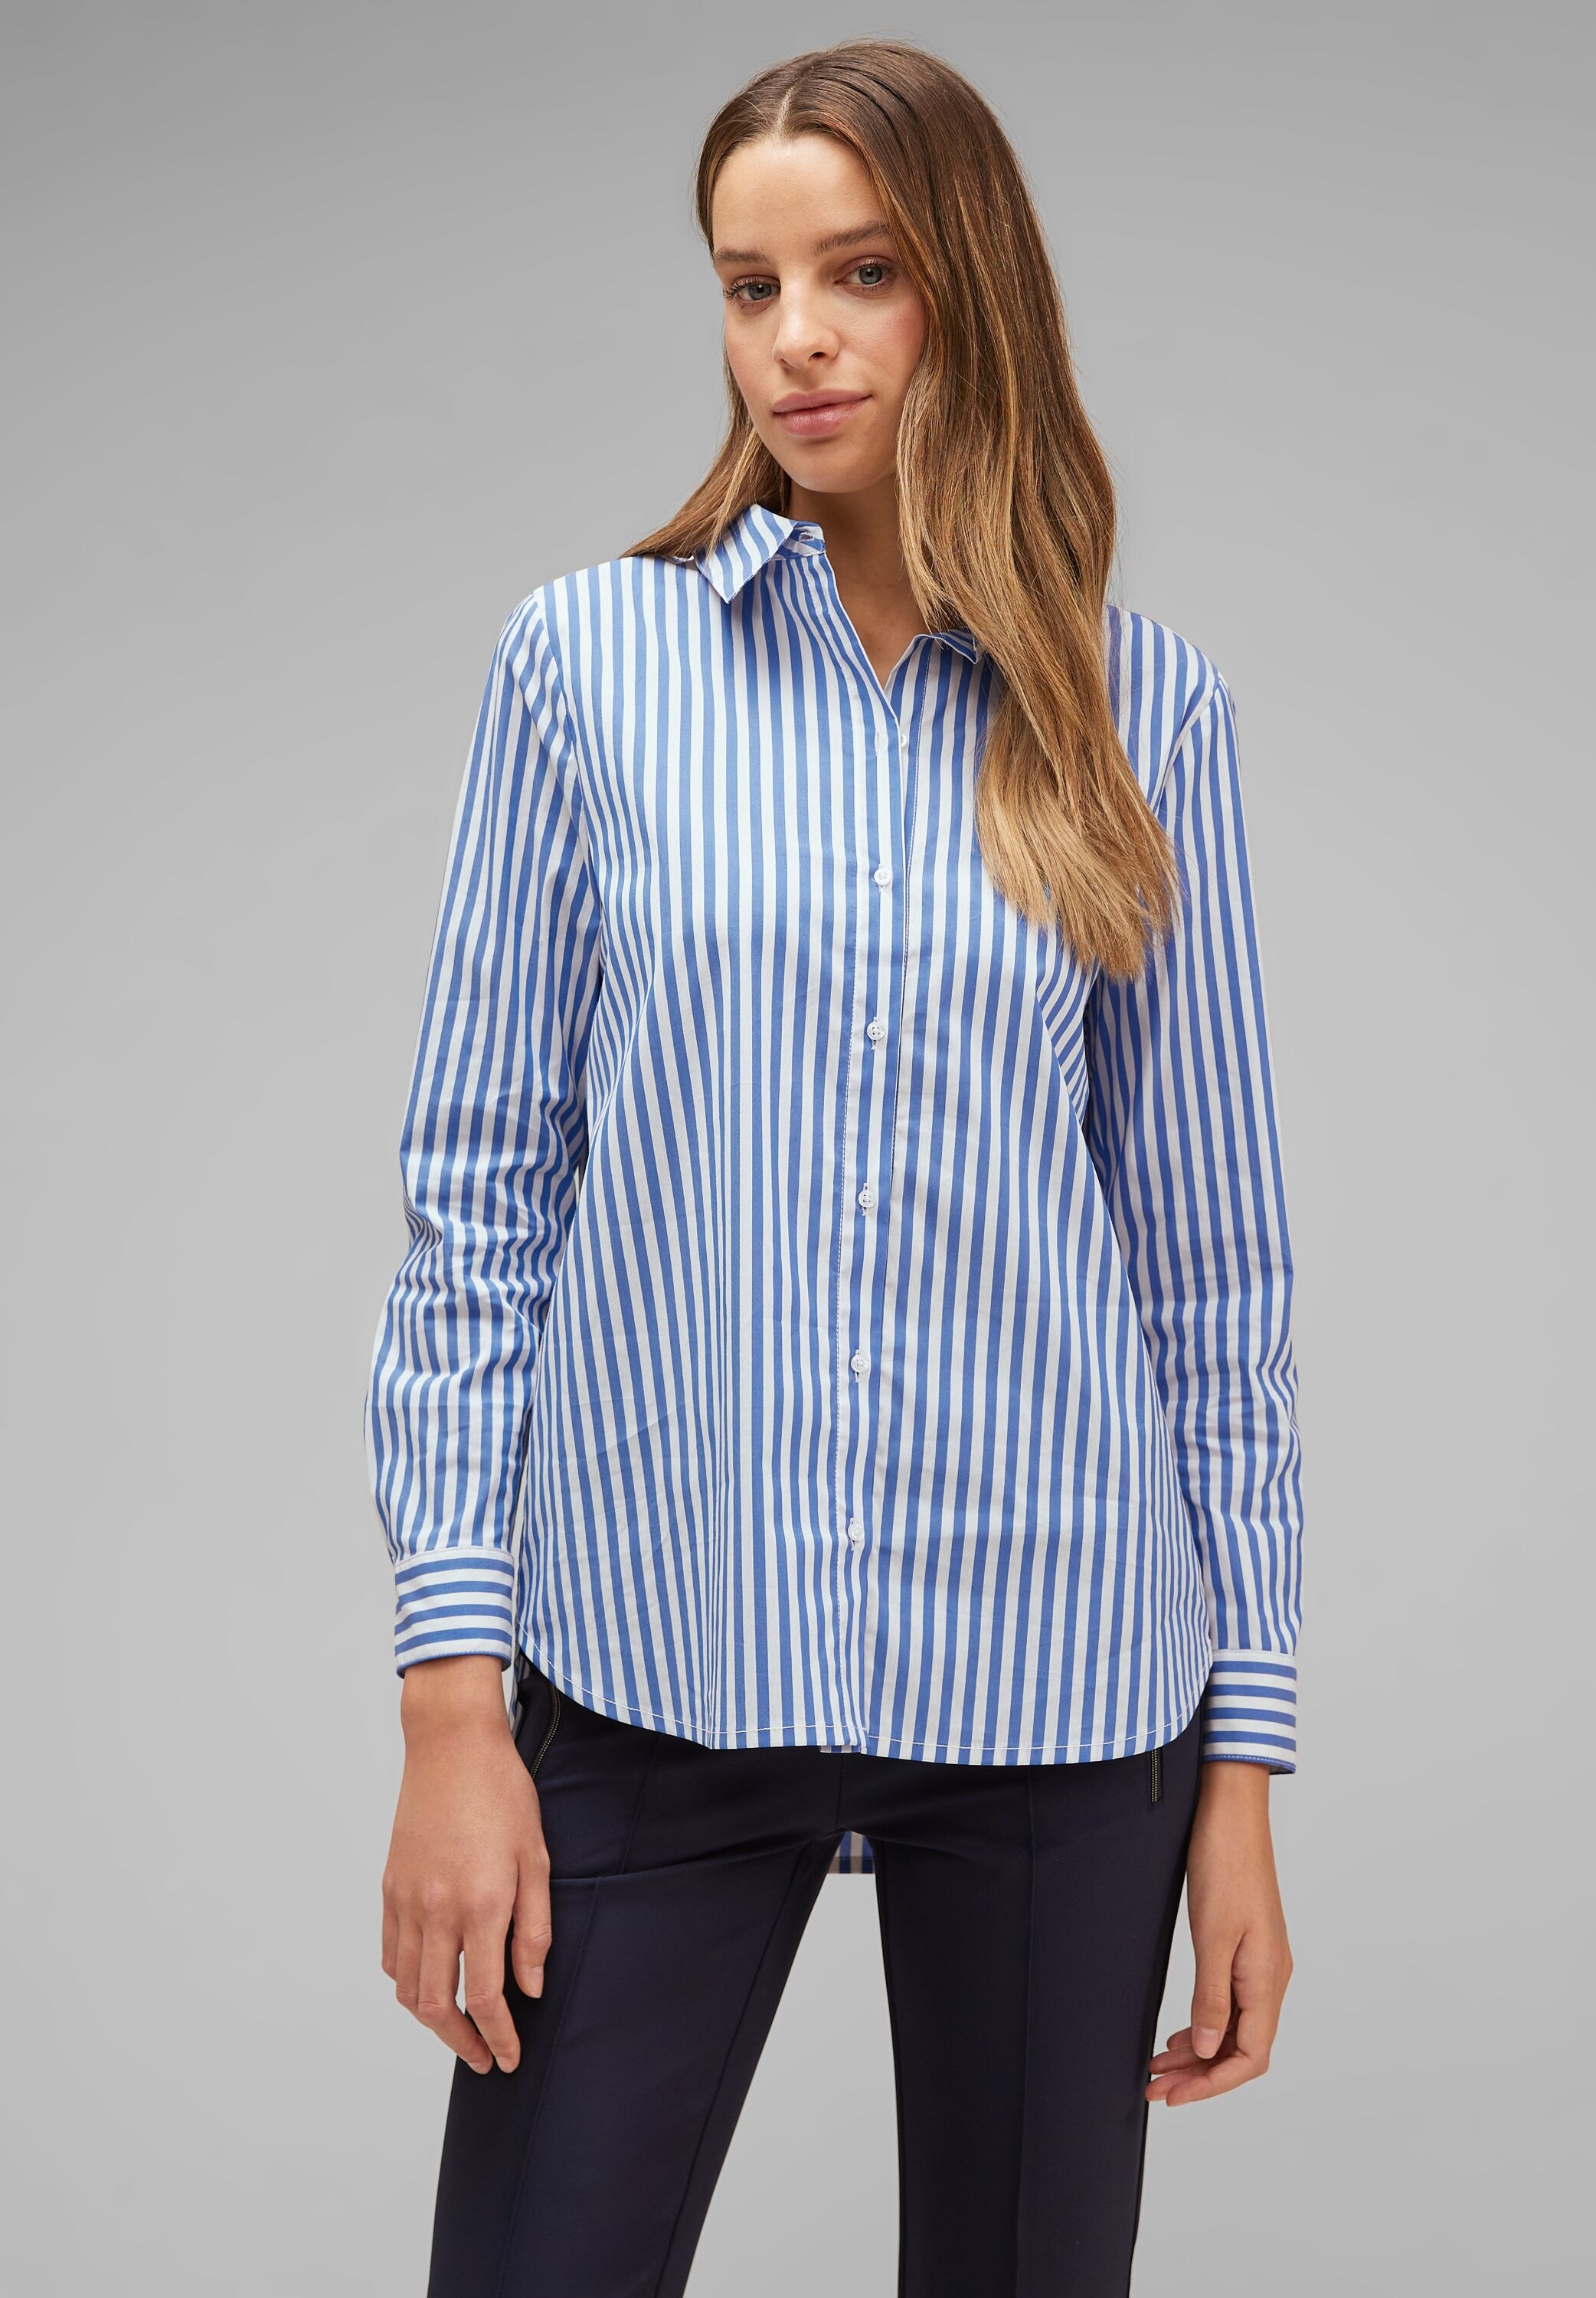 Longbluse »Striped Office Blouse«, mit Streifenmuster